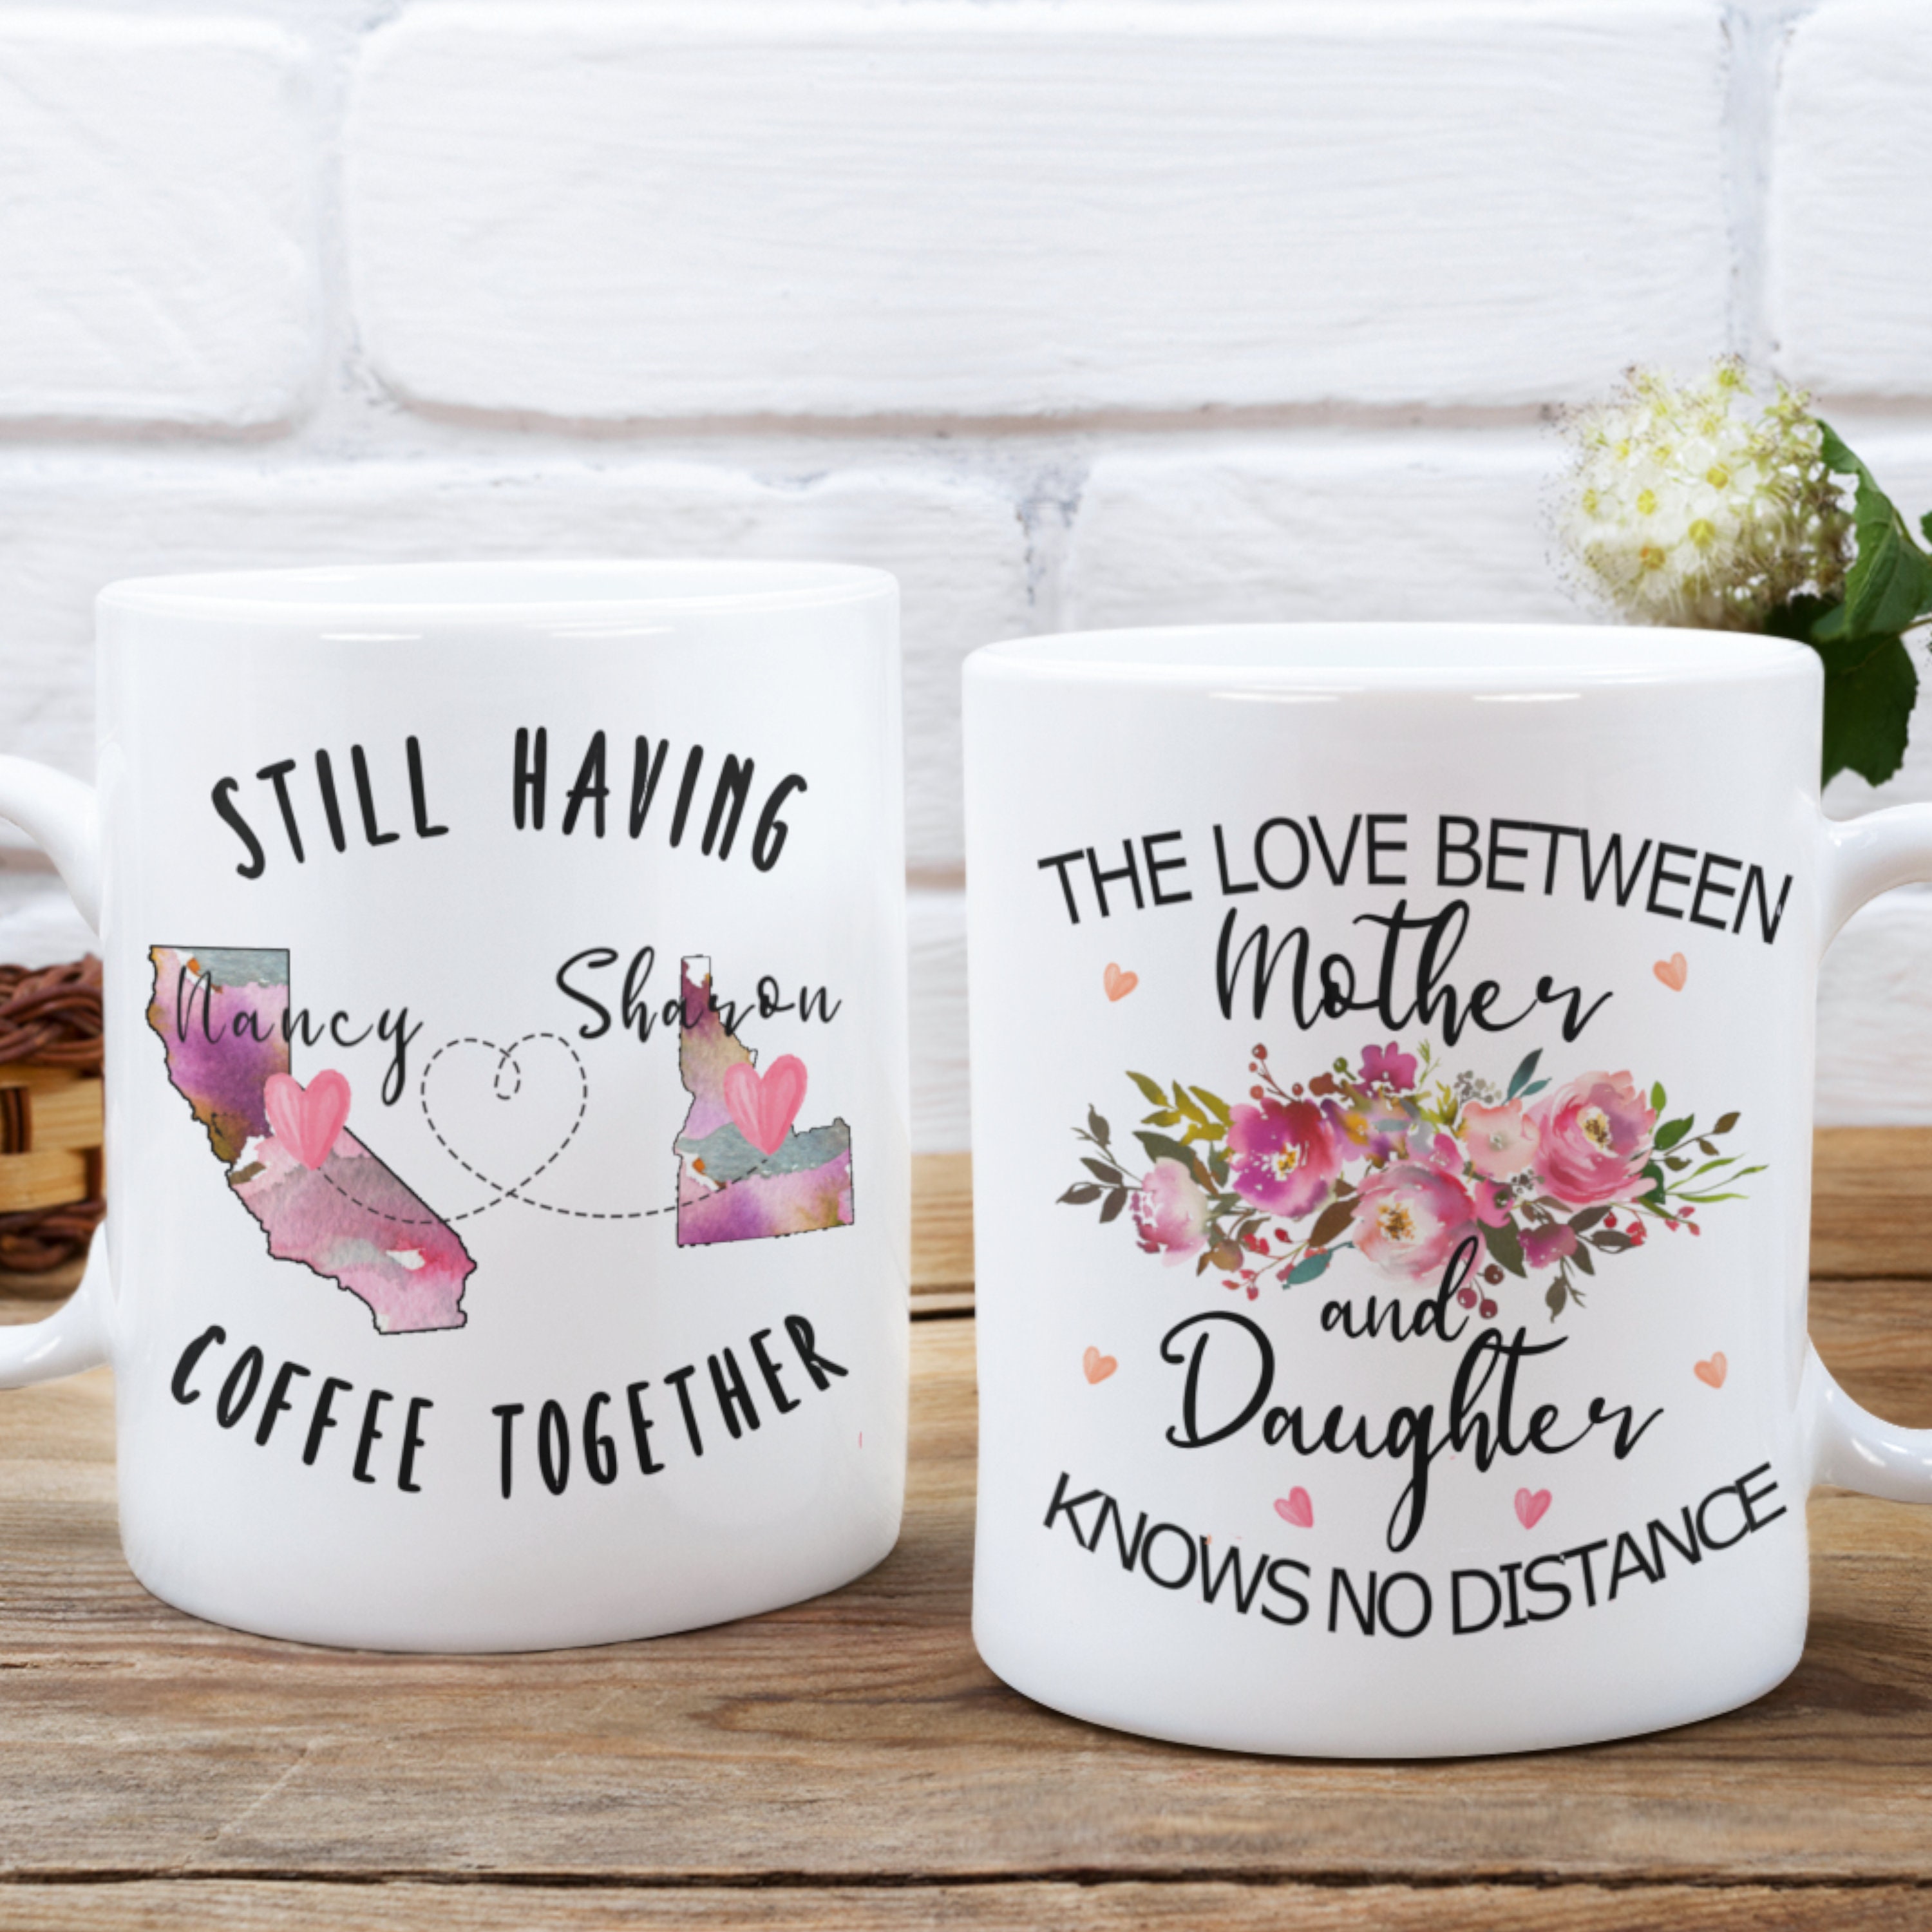 Personalized Long Distance Mom & Son or Daughter Mug